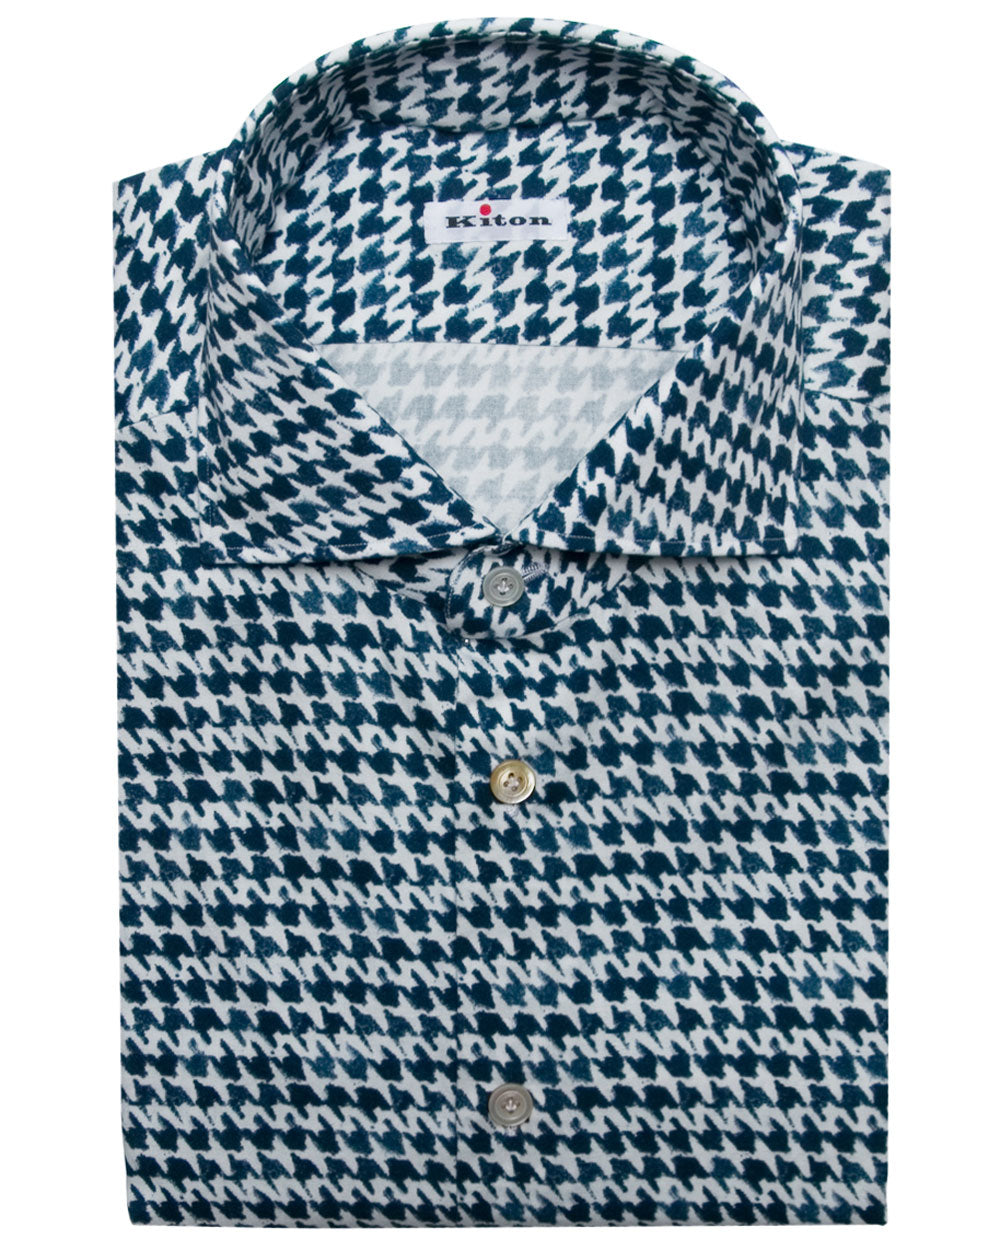 Navy and White Houndstooth Sport Shirt